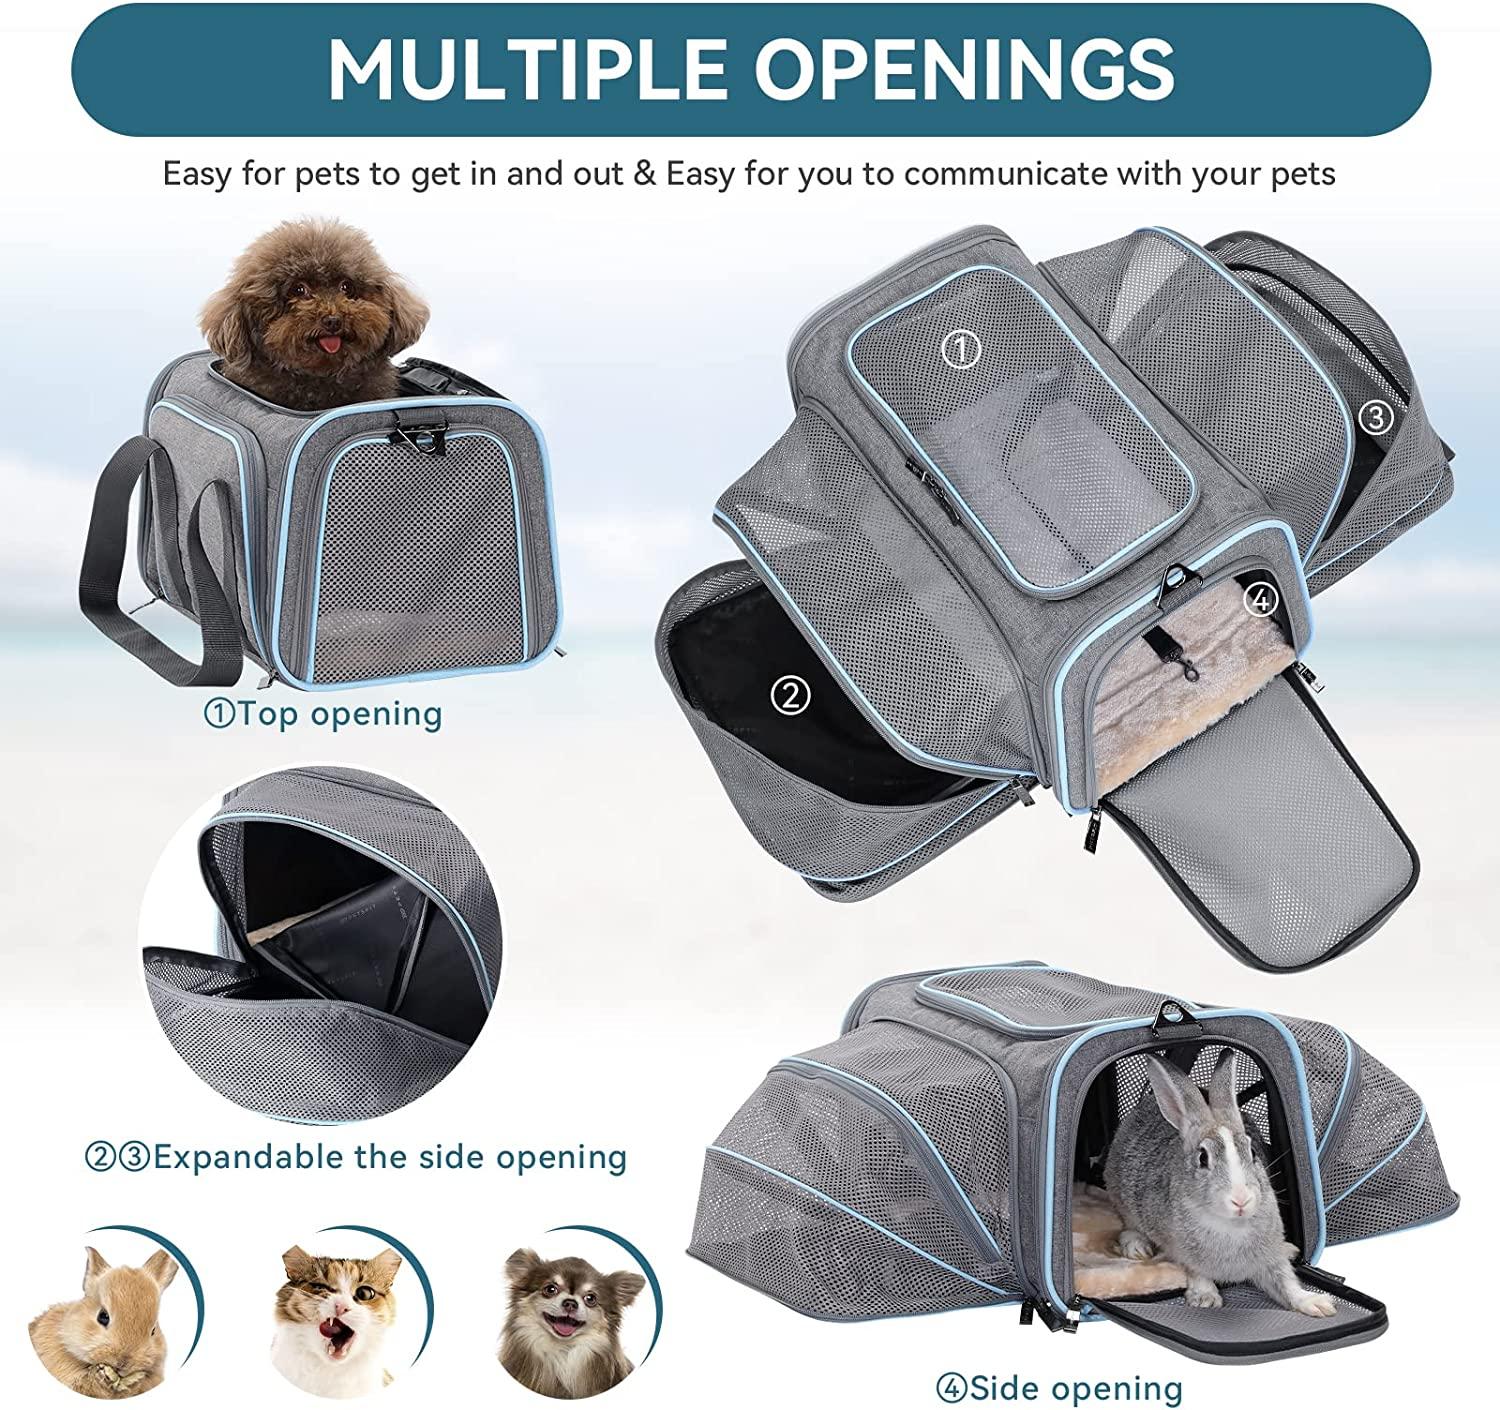 Petsfit Expandable Cat Carrier Dog Carrier,Airline Approved Soft-Sided  Portable Pet Travel Washable Carrier for Kittens,Puppies,Removable Soft  Plush mat and Pockets S:16x10x9 Light Grey